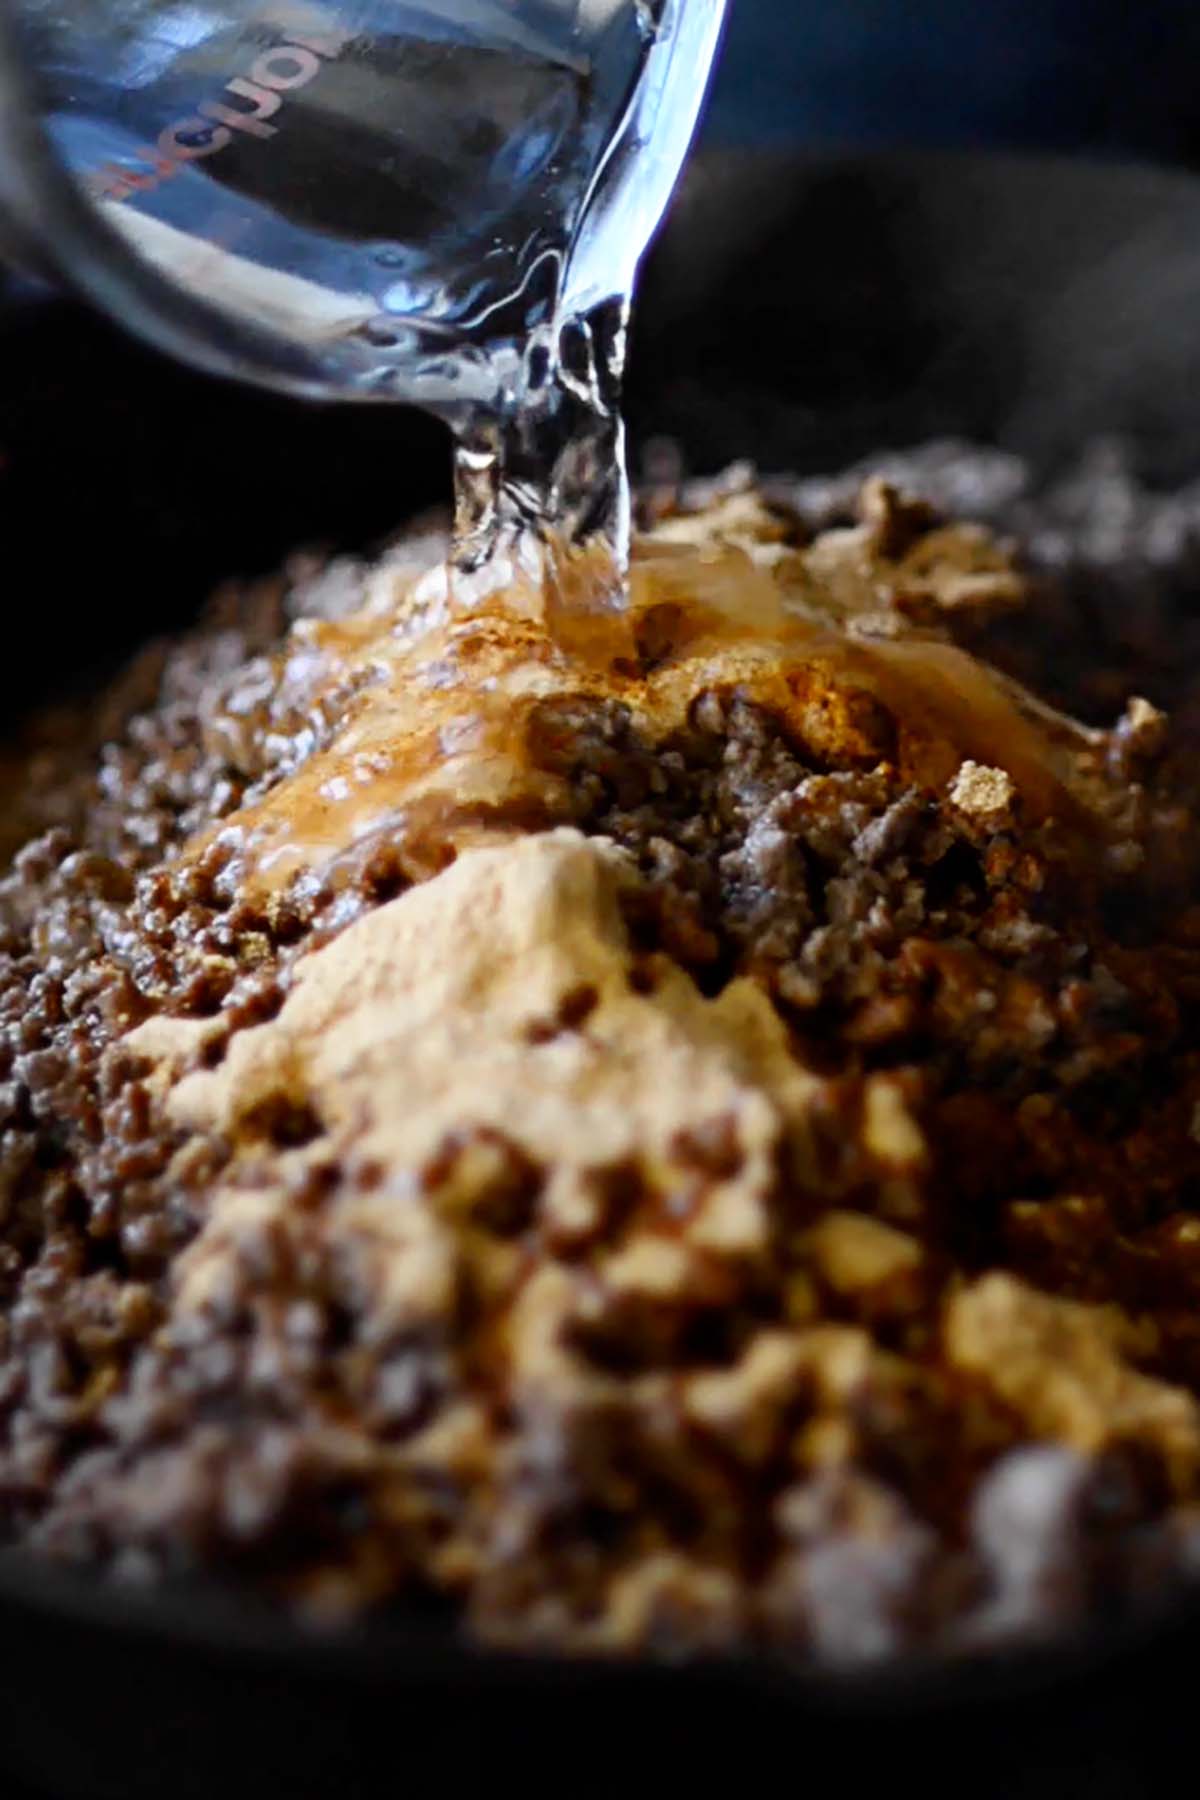 Water being poured into ground beef topped with with taco seasoning in a cast iron skillet.